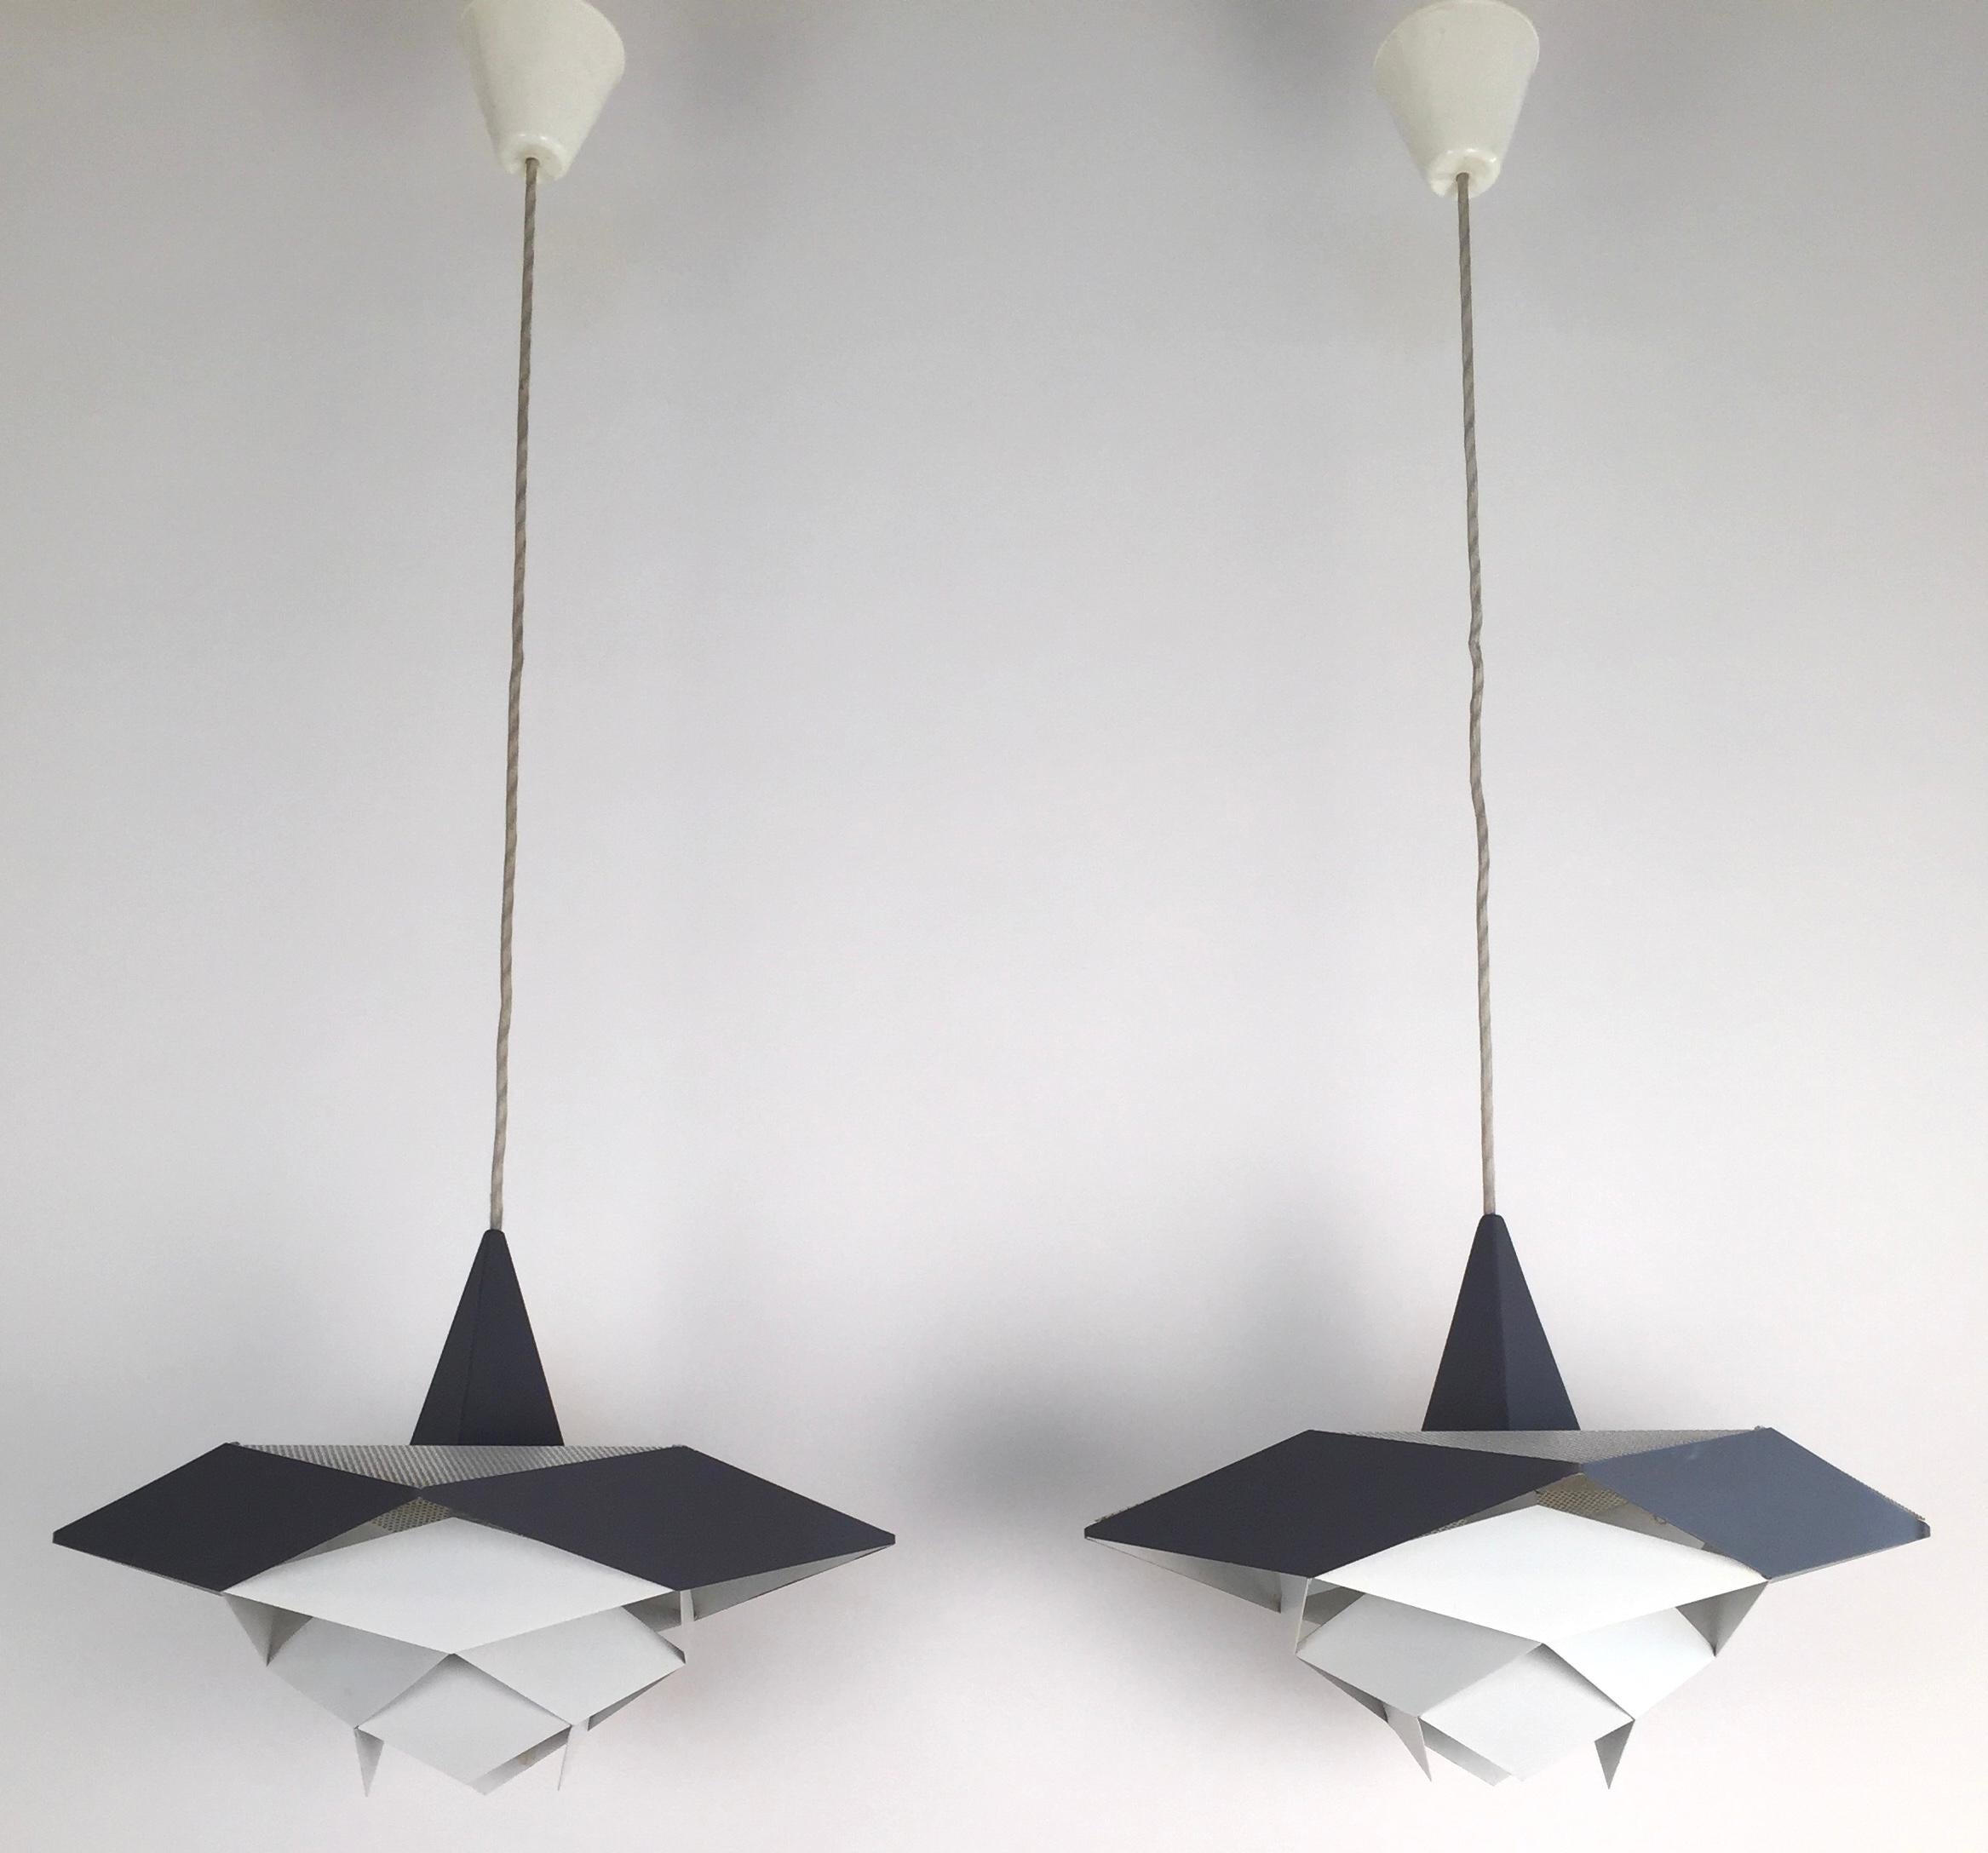 A beautiful pair of ceiling lamps ,designed by Preben Dahl and edited by Hans Folsgaard in the 60s.White and grey lacquered metal in a harlequin-like pattern. Excellent condition.